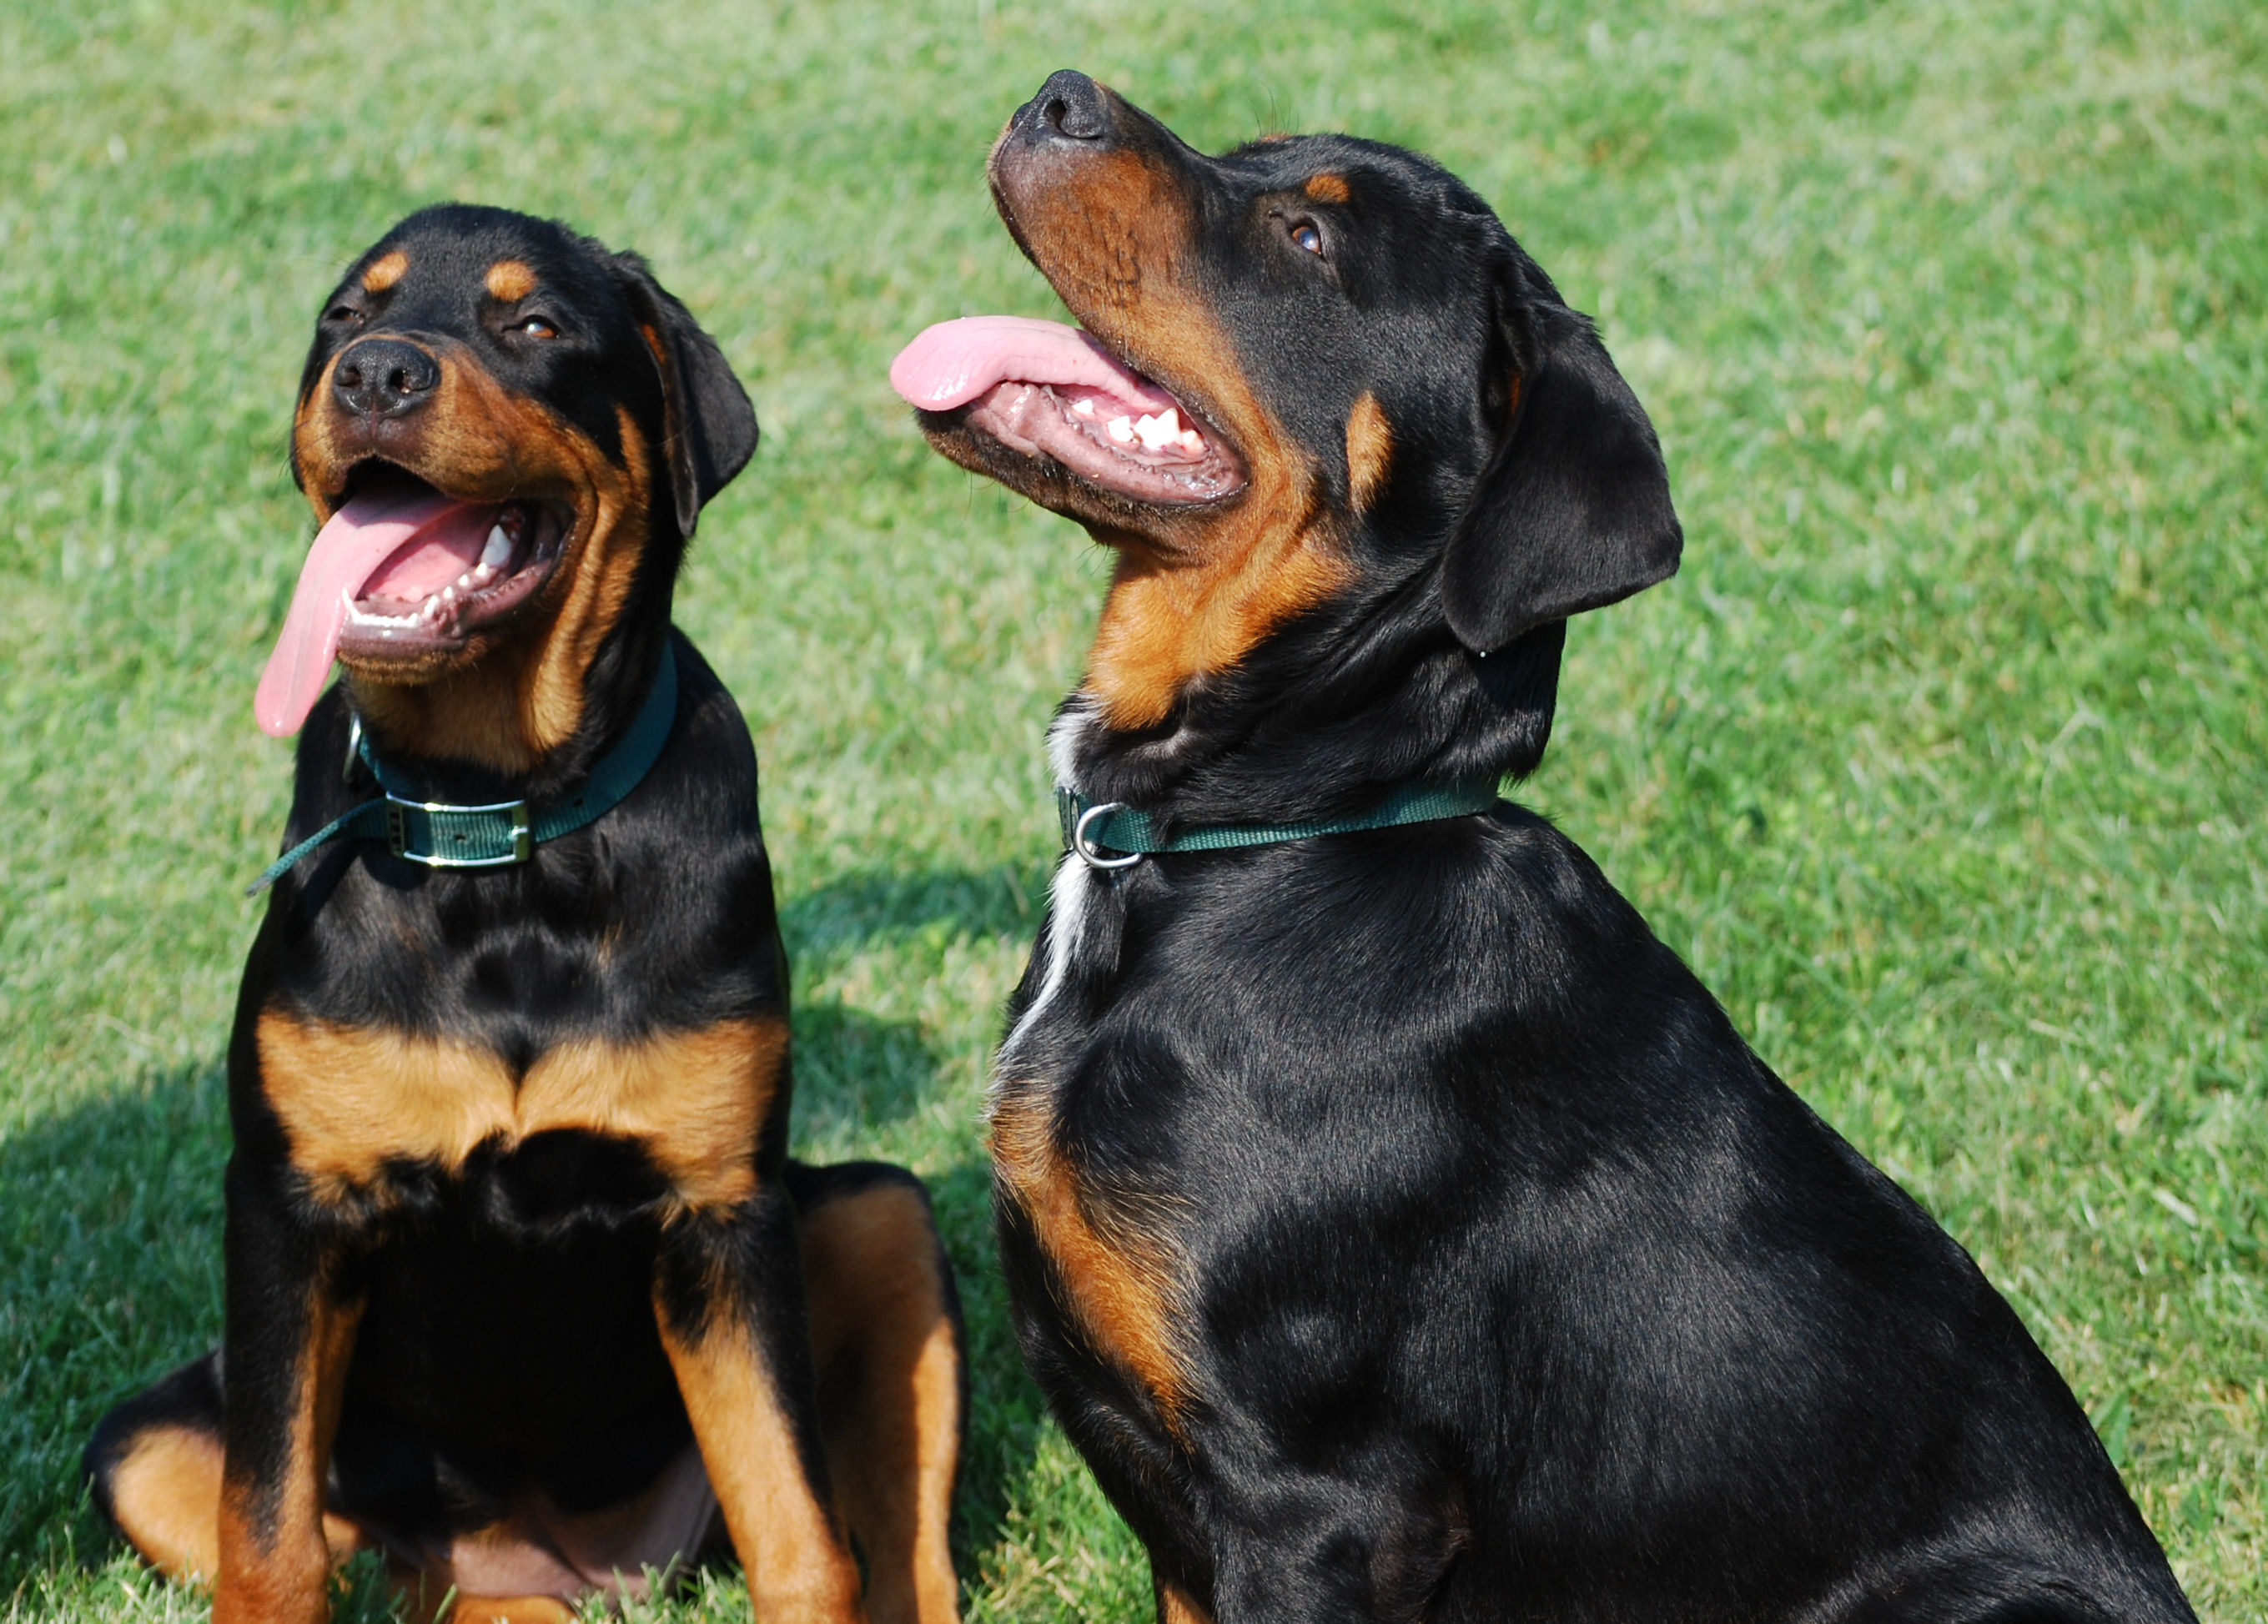 Two Rottweiler dogs photo and wallpaper Beautiful Two Rottweiler dogs